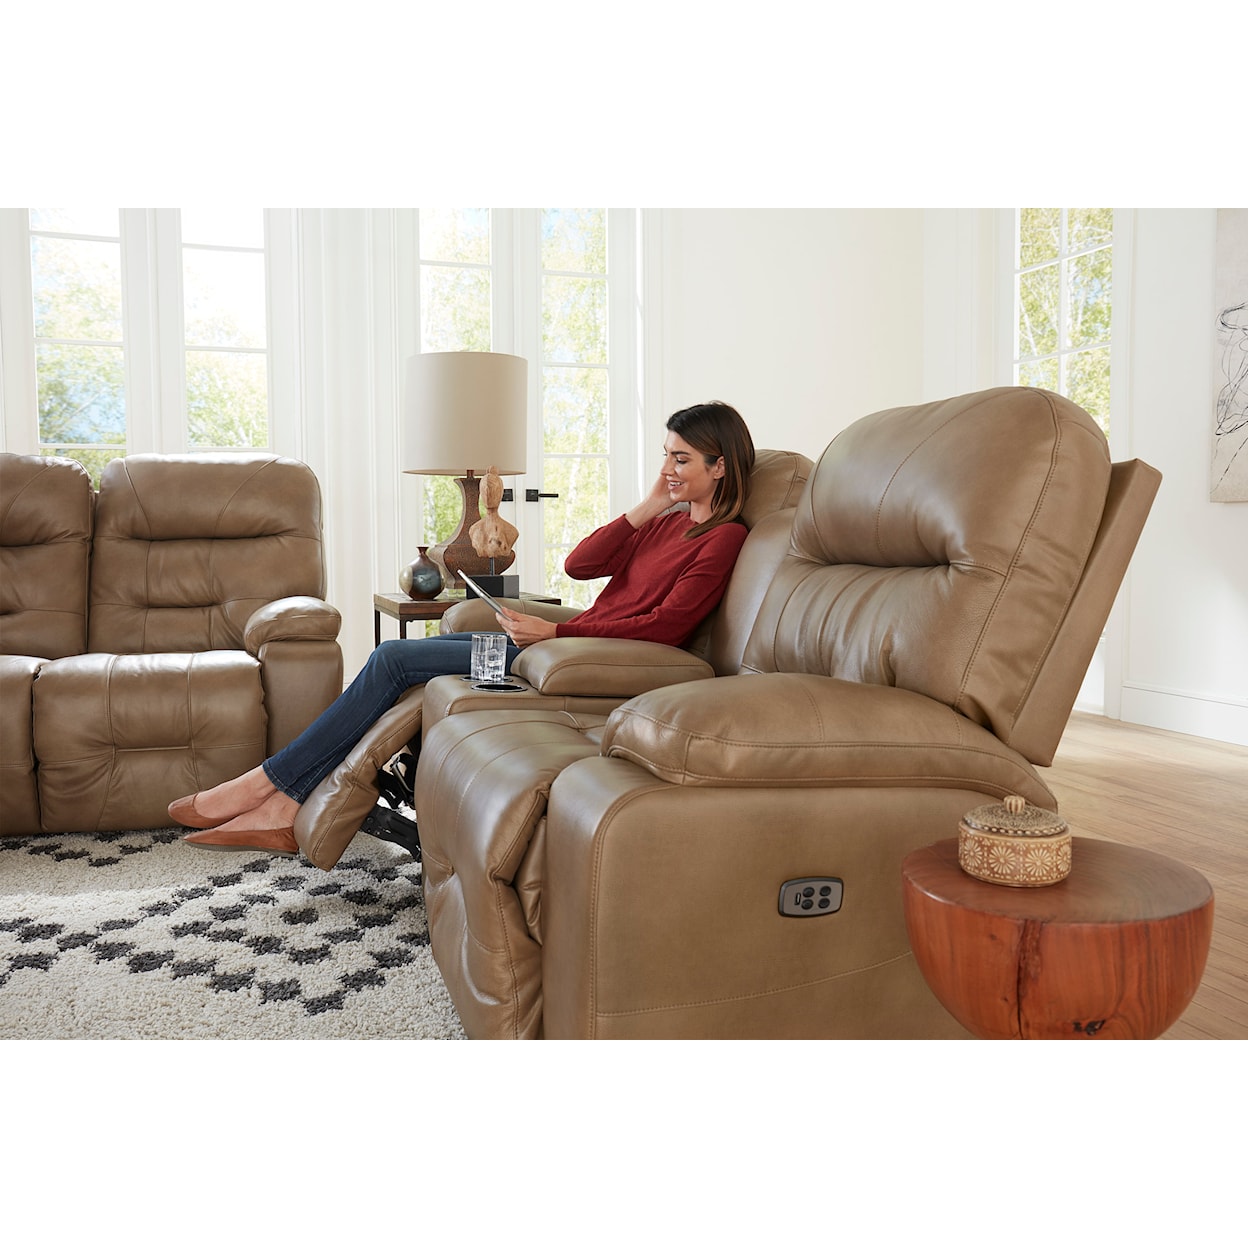 Best Home Furnishings Ryson Power Space Saver Console Recliner